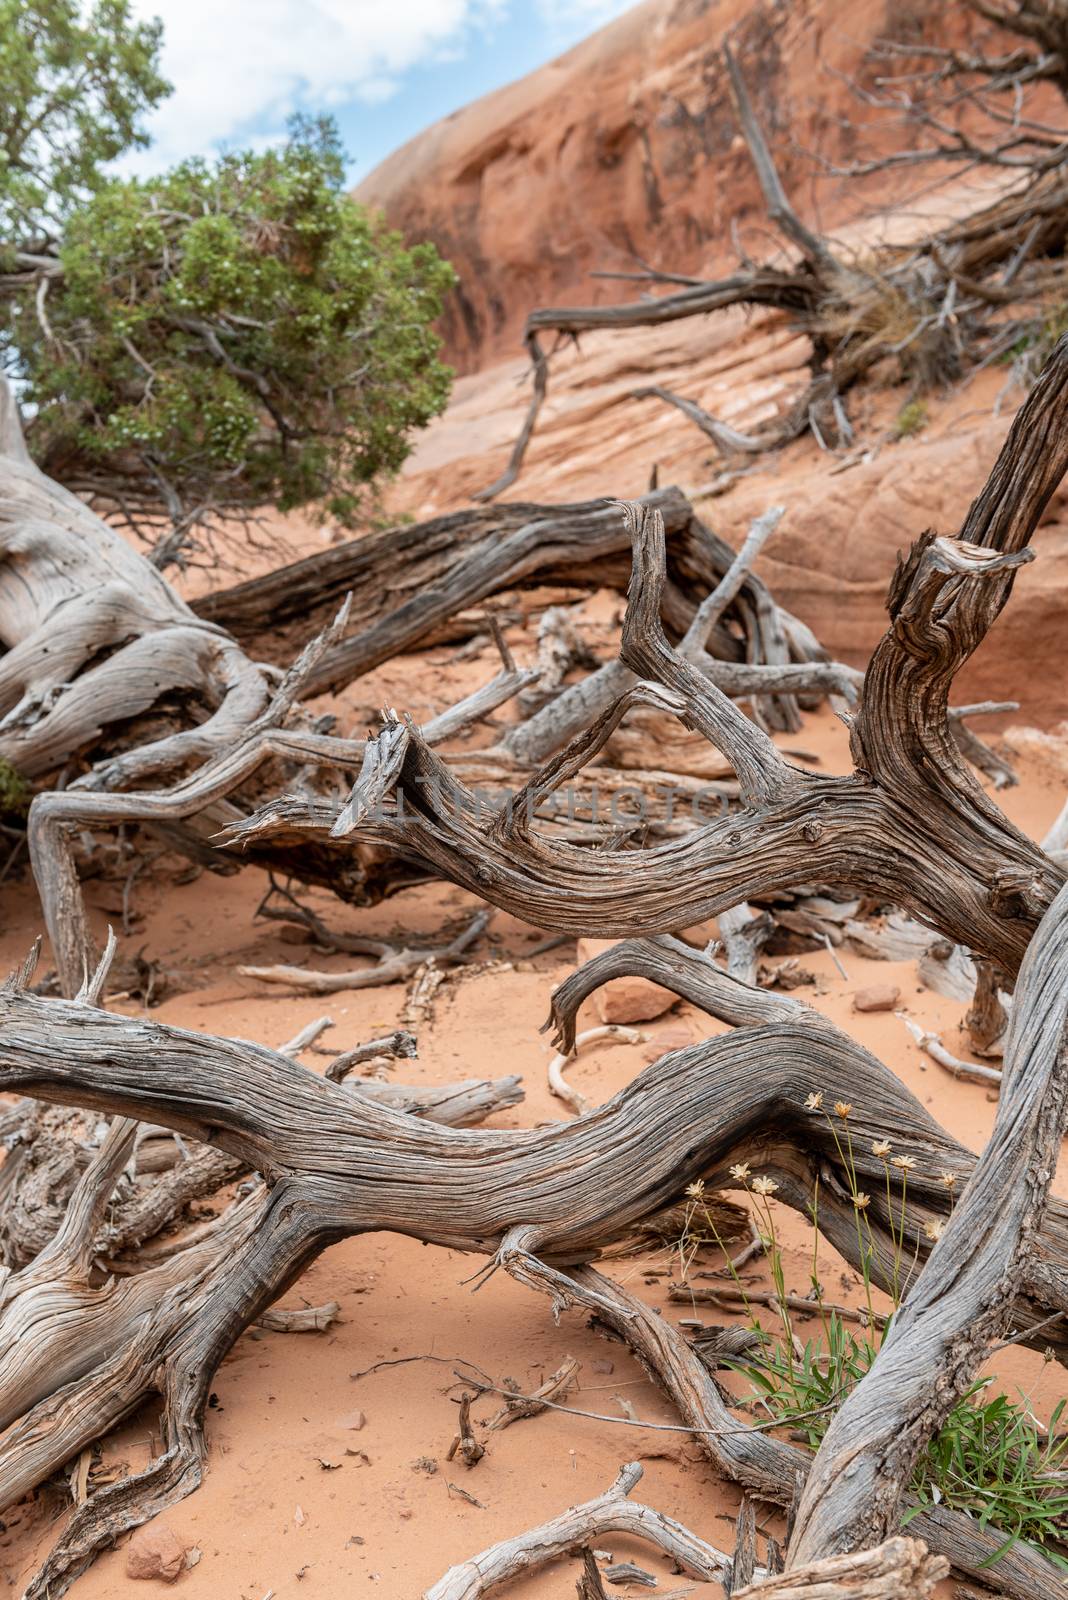 Fallen dry tree branches on Devils Garden Trail in Arches National Park, Utah